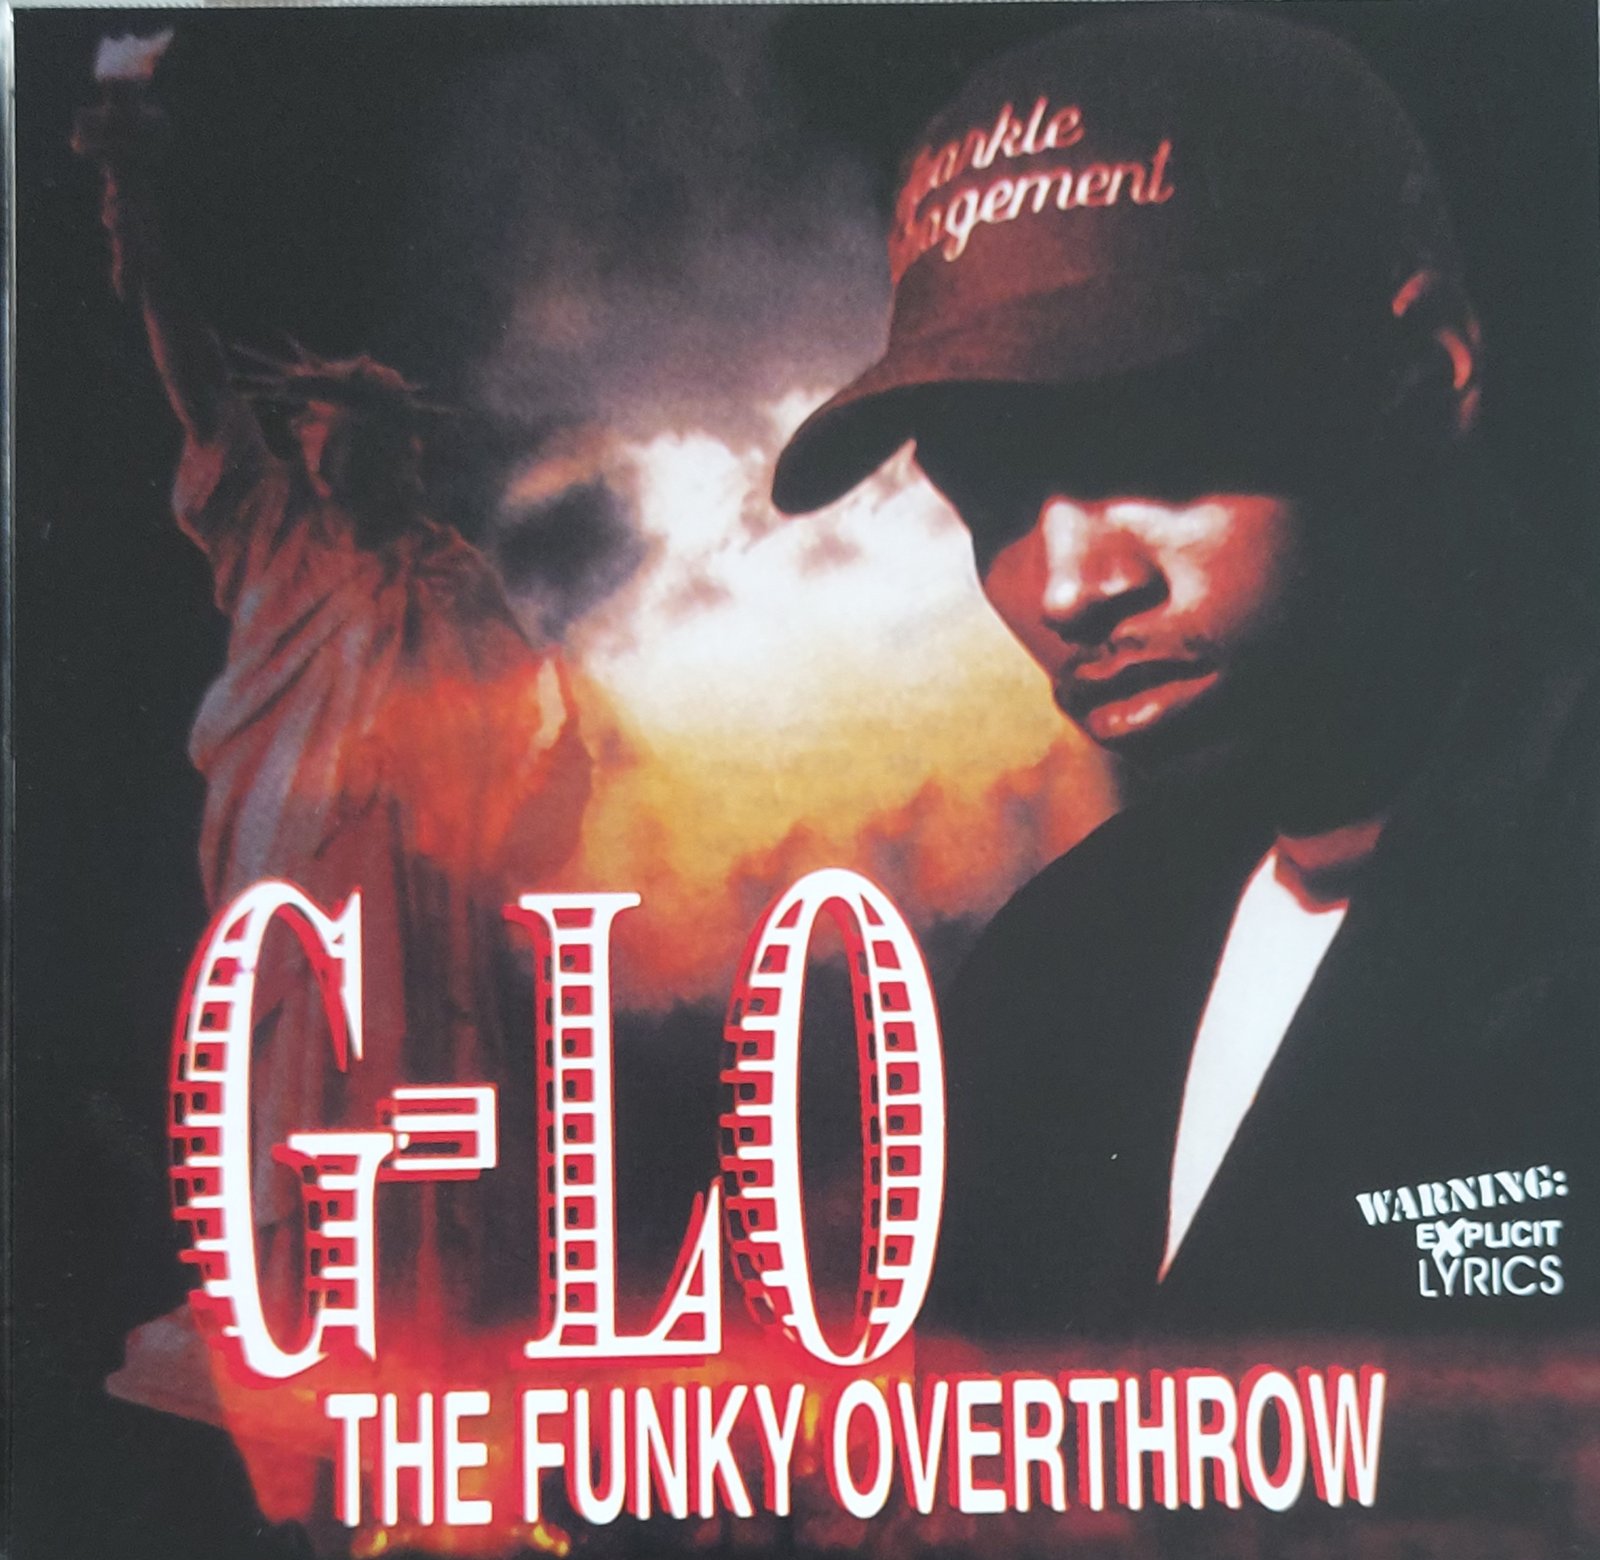 CD: G-LO- THE FUNKY OVERTHROW 1997-2021 REISSUE (Oakland, CA